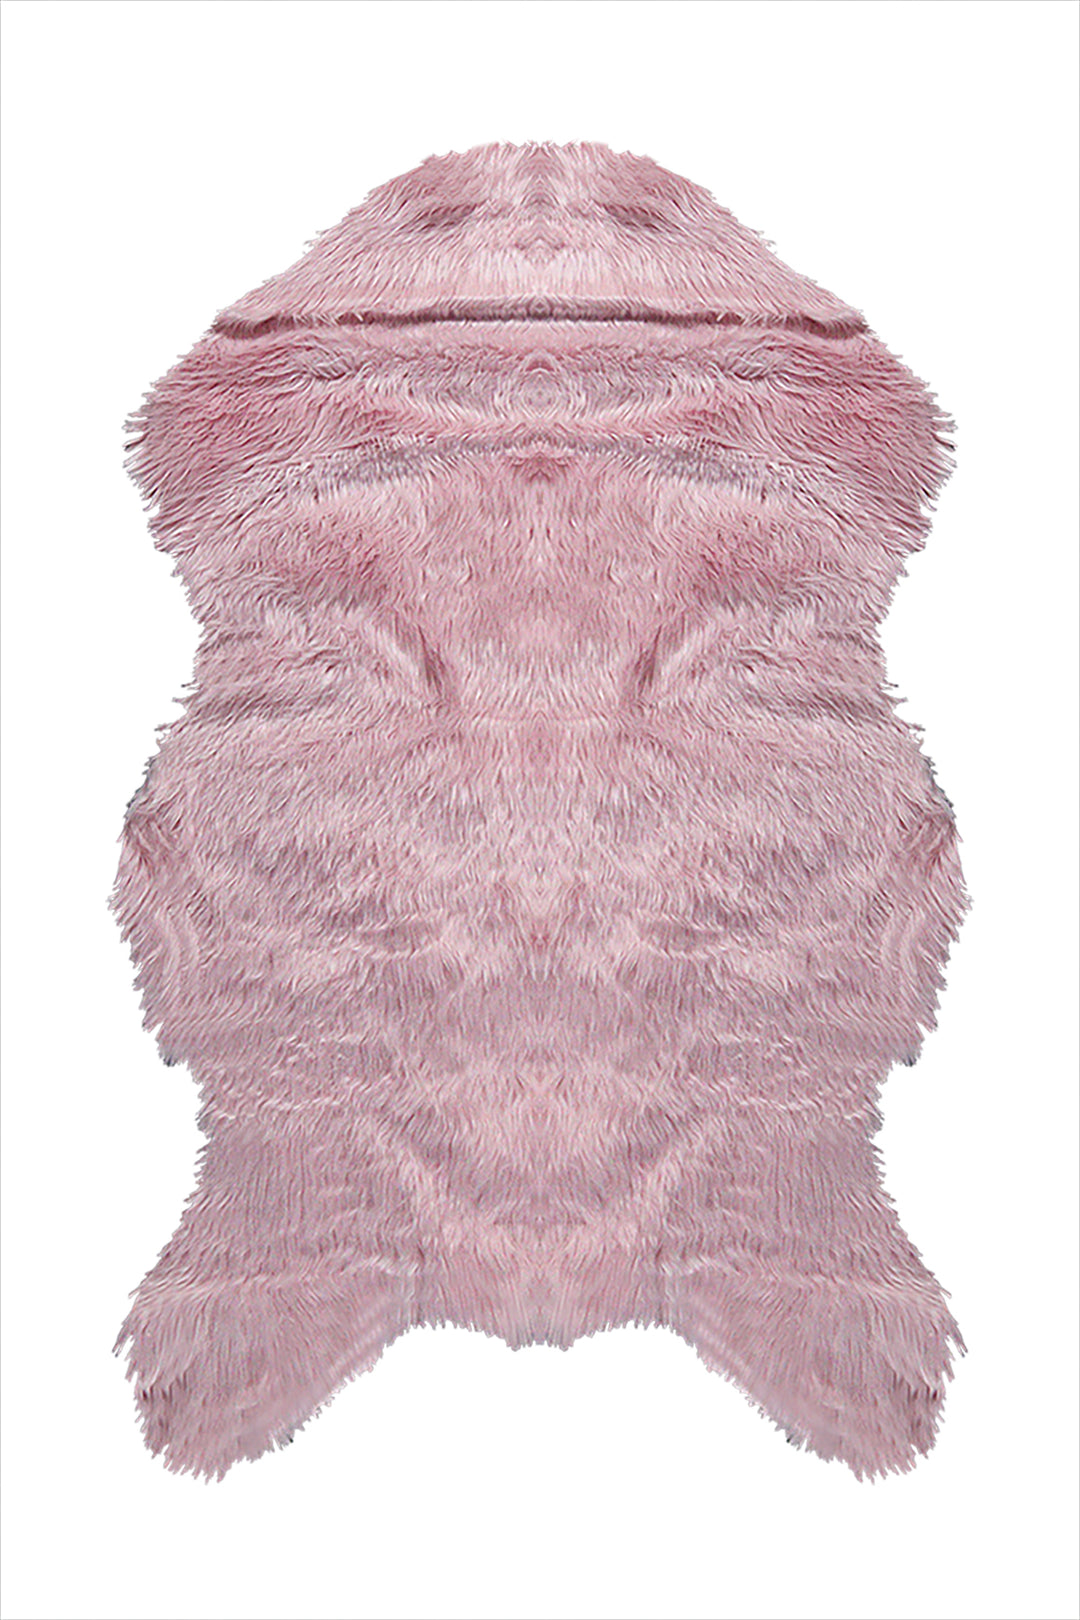 Wild Life (Sheep Fur) - 3.9 x 5.5 FT - Pink - Luxuriously Soft Fluffy Rug